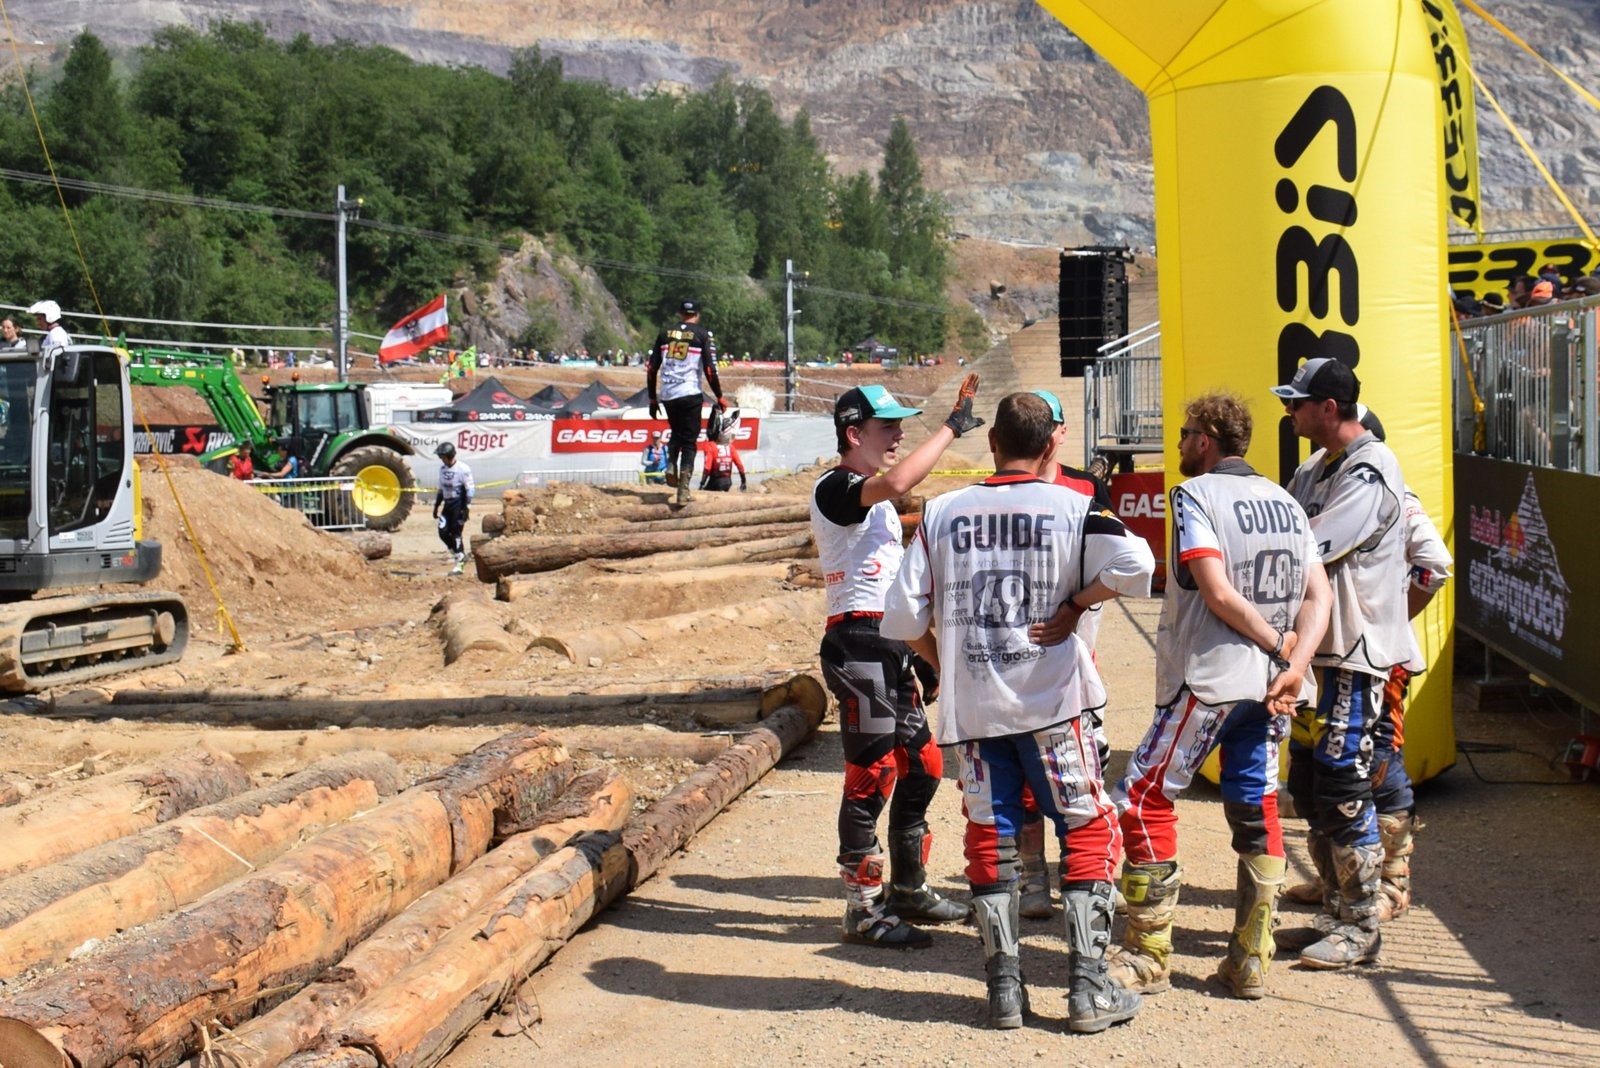 Red Bull Erzbergrodeo 2022:  GasGas Xtreme Trial Challenge behind the scenes !